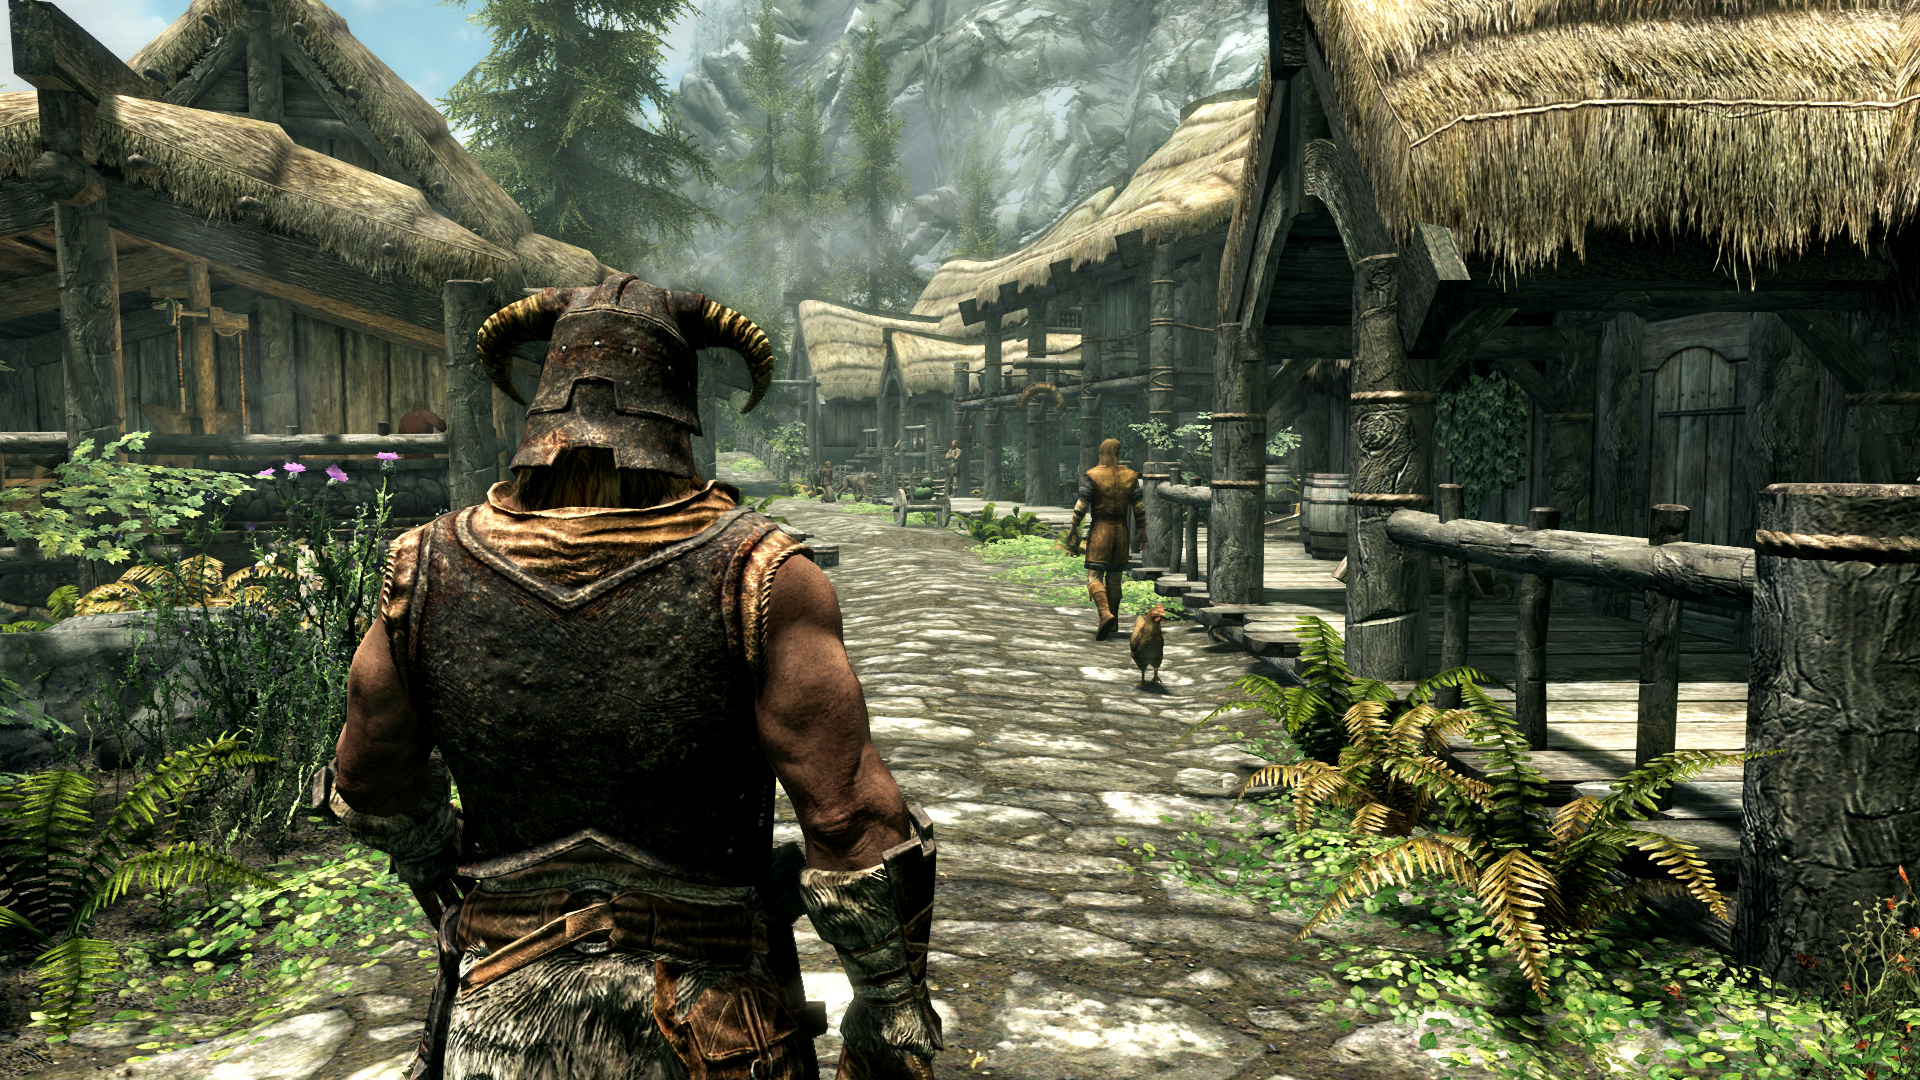 Ps5 Now Runs Skyrim At 60 Fps Here S How To Enable It Tom S Guide